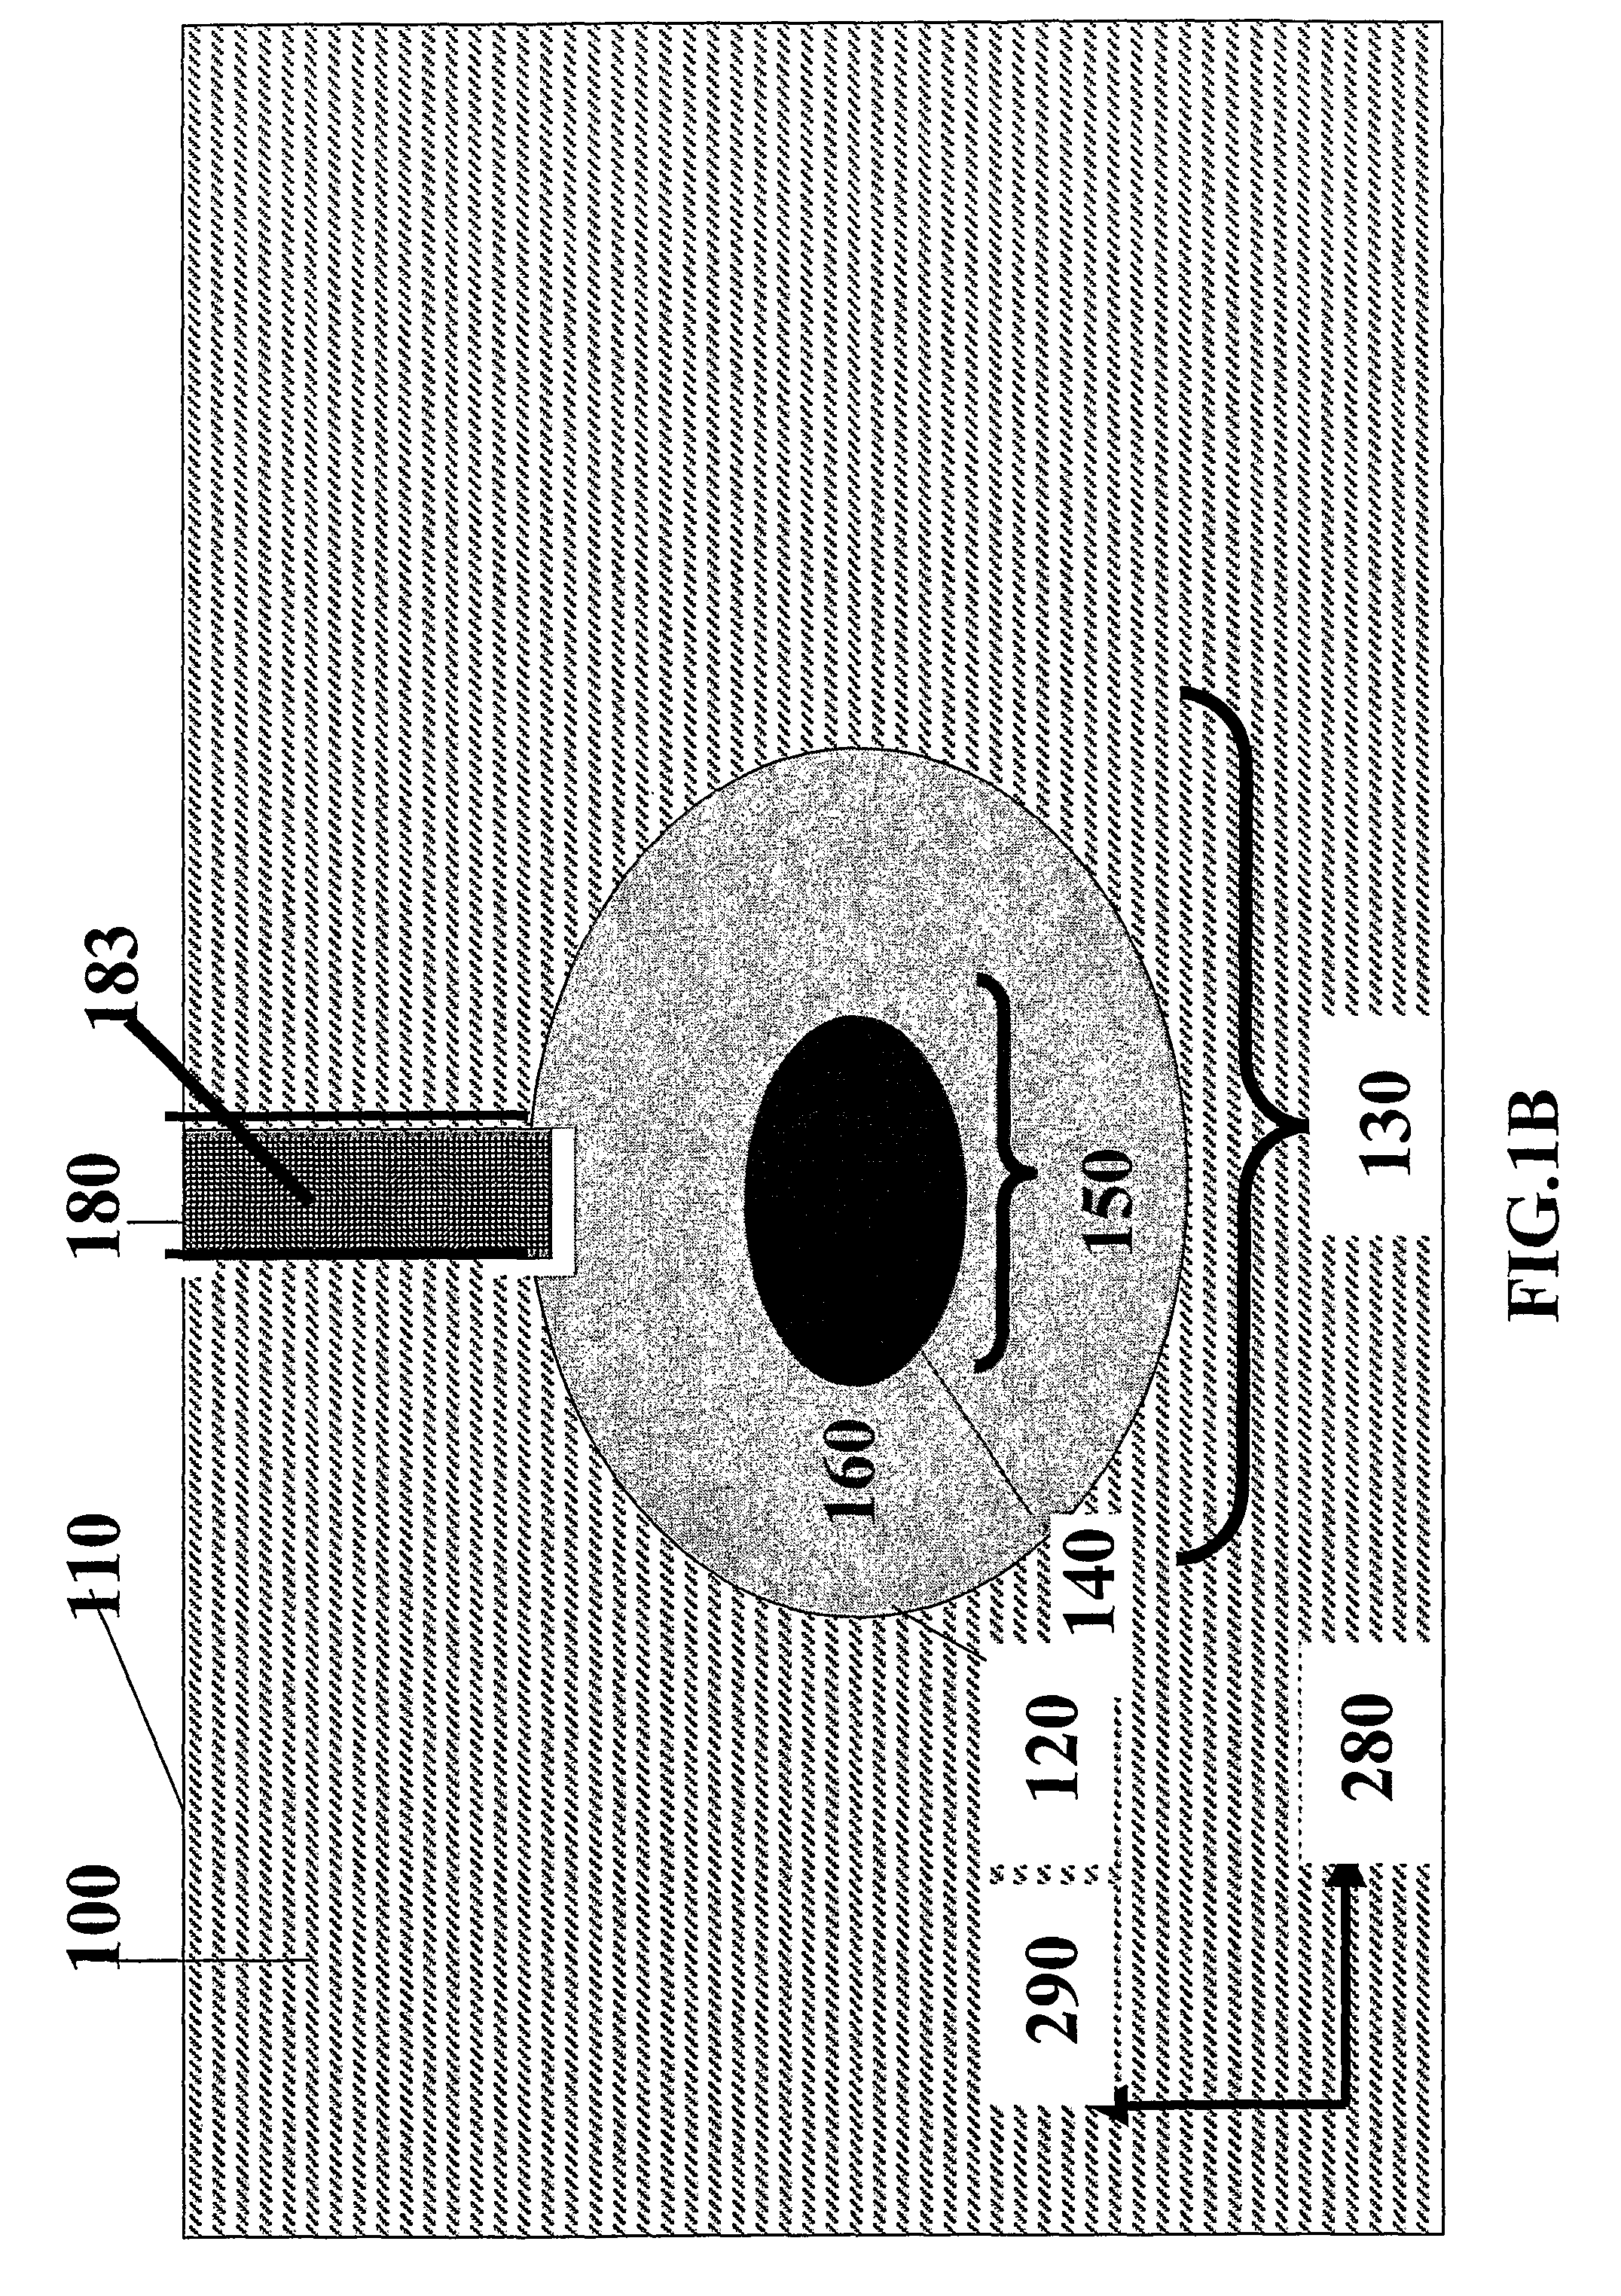 Embedded Channels, Embedded Waveguide And Methods Of Manufacturing And Using The Same